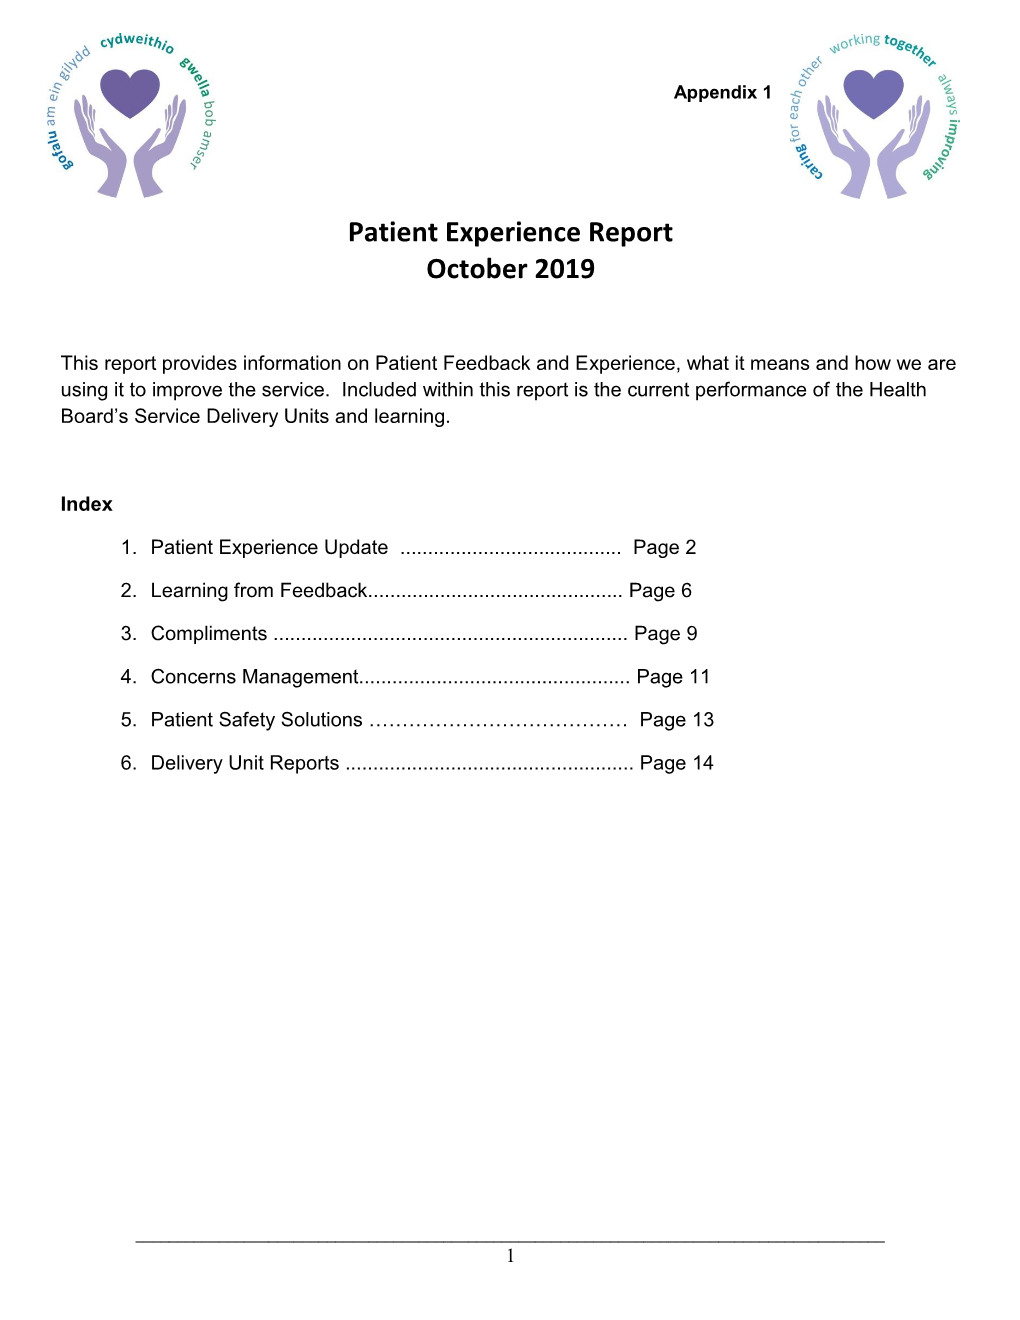 Morriston Hospital Service Delivery Unit Incidents: 1St July – 30Th September 2019 2213 Incidents Were Reported with the 3 Top Themes Being: